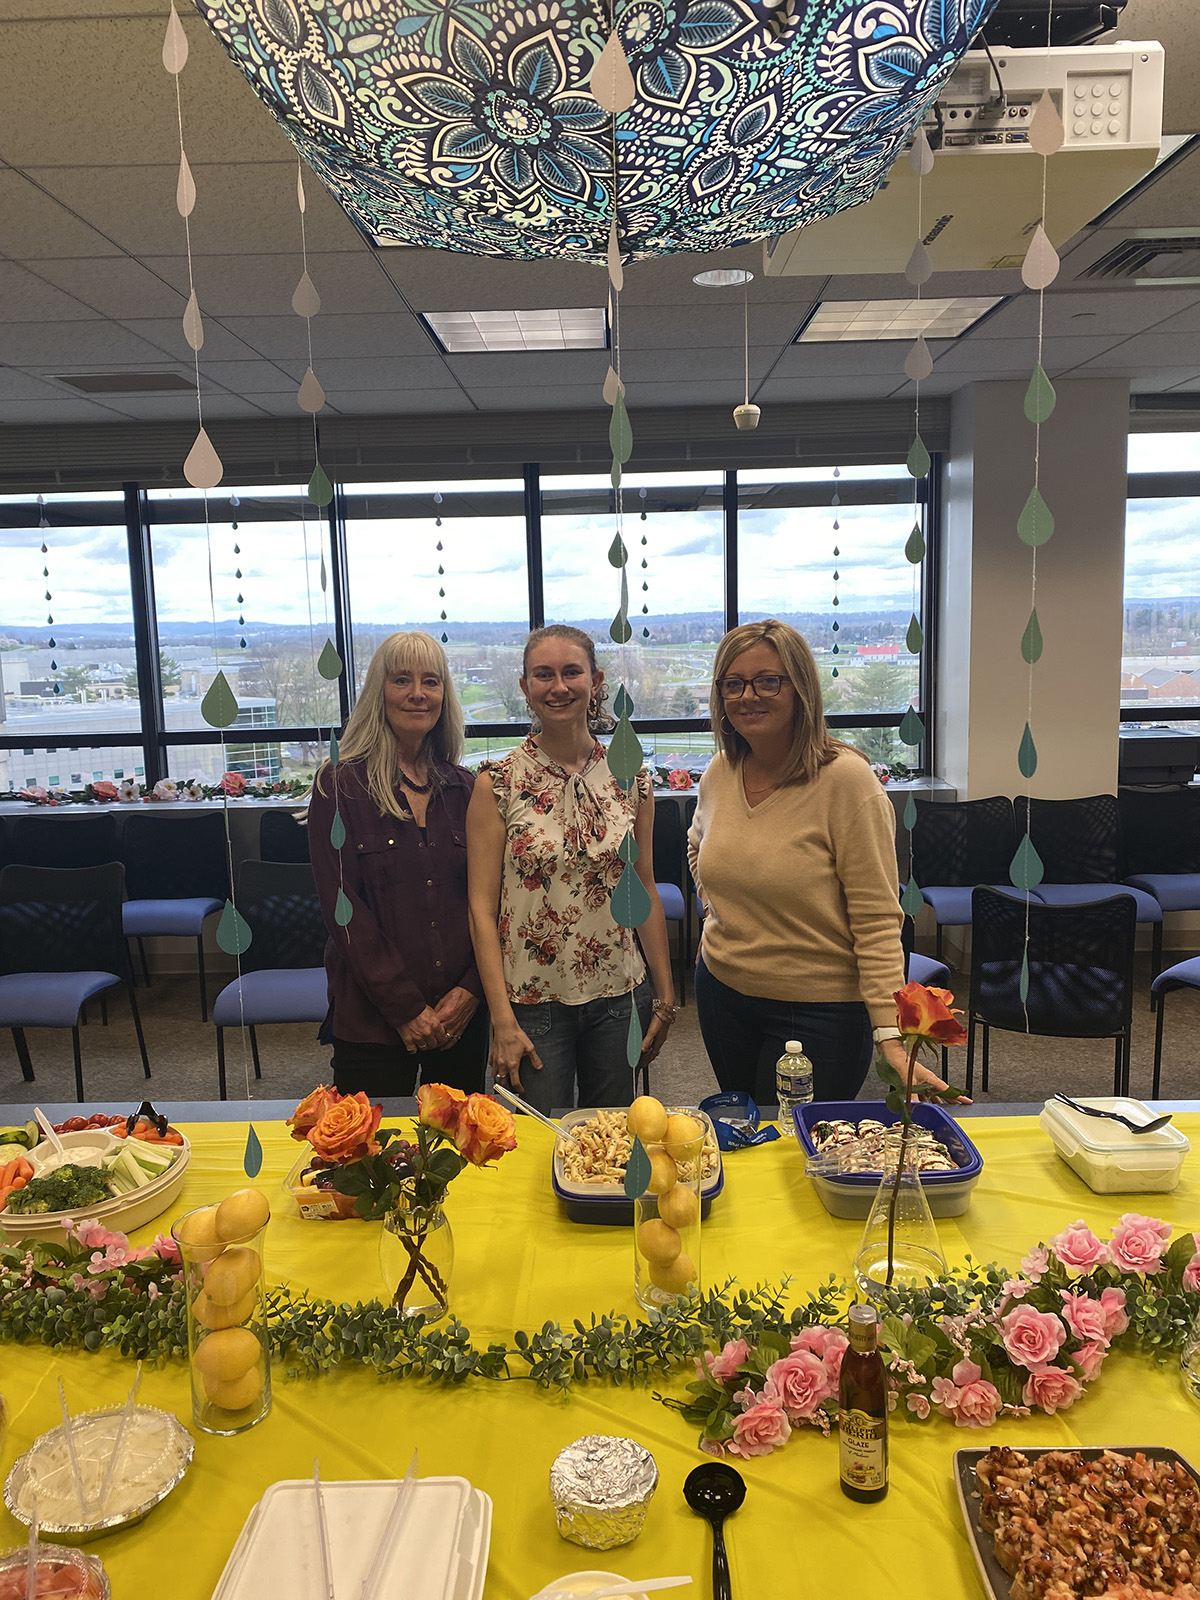 Three women stand behind a table with food and decorations with an April Showers Bring May Flowers theme.